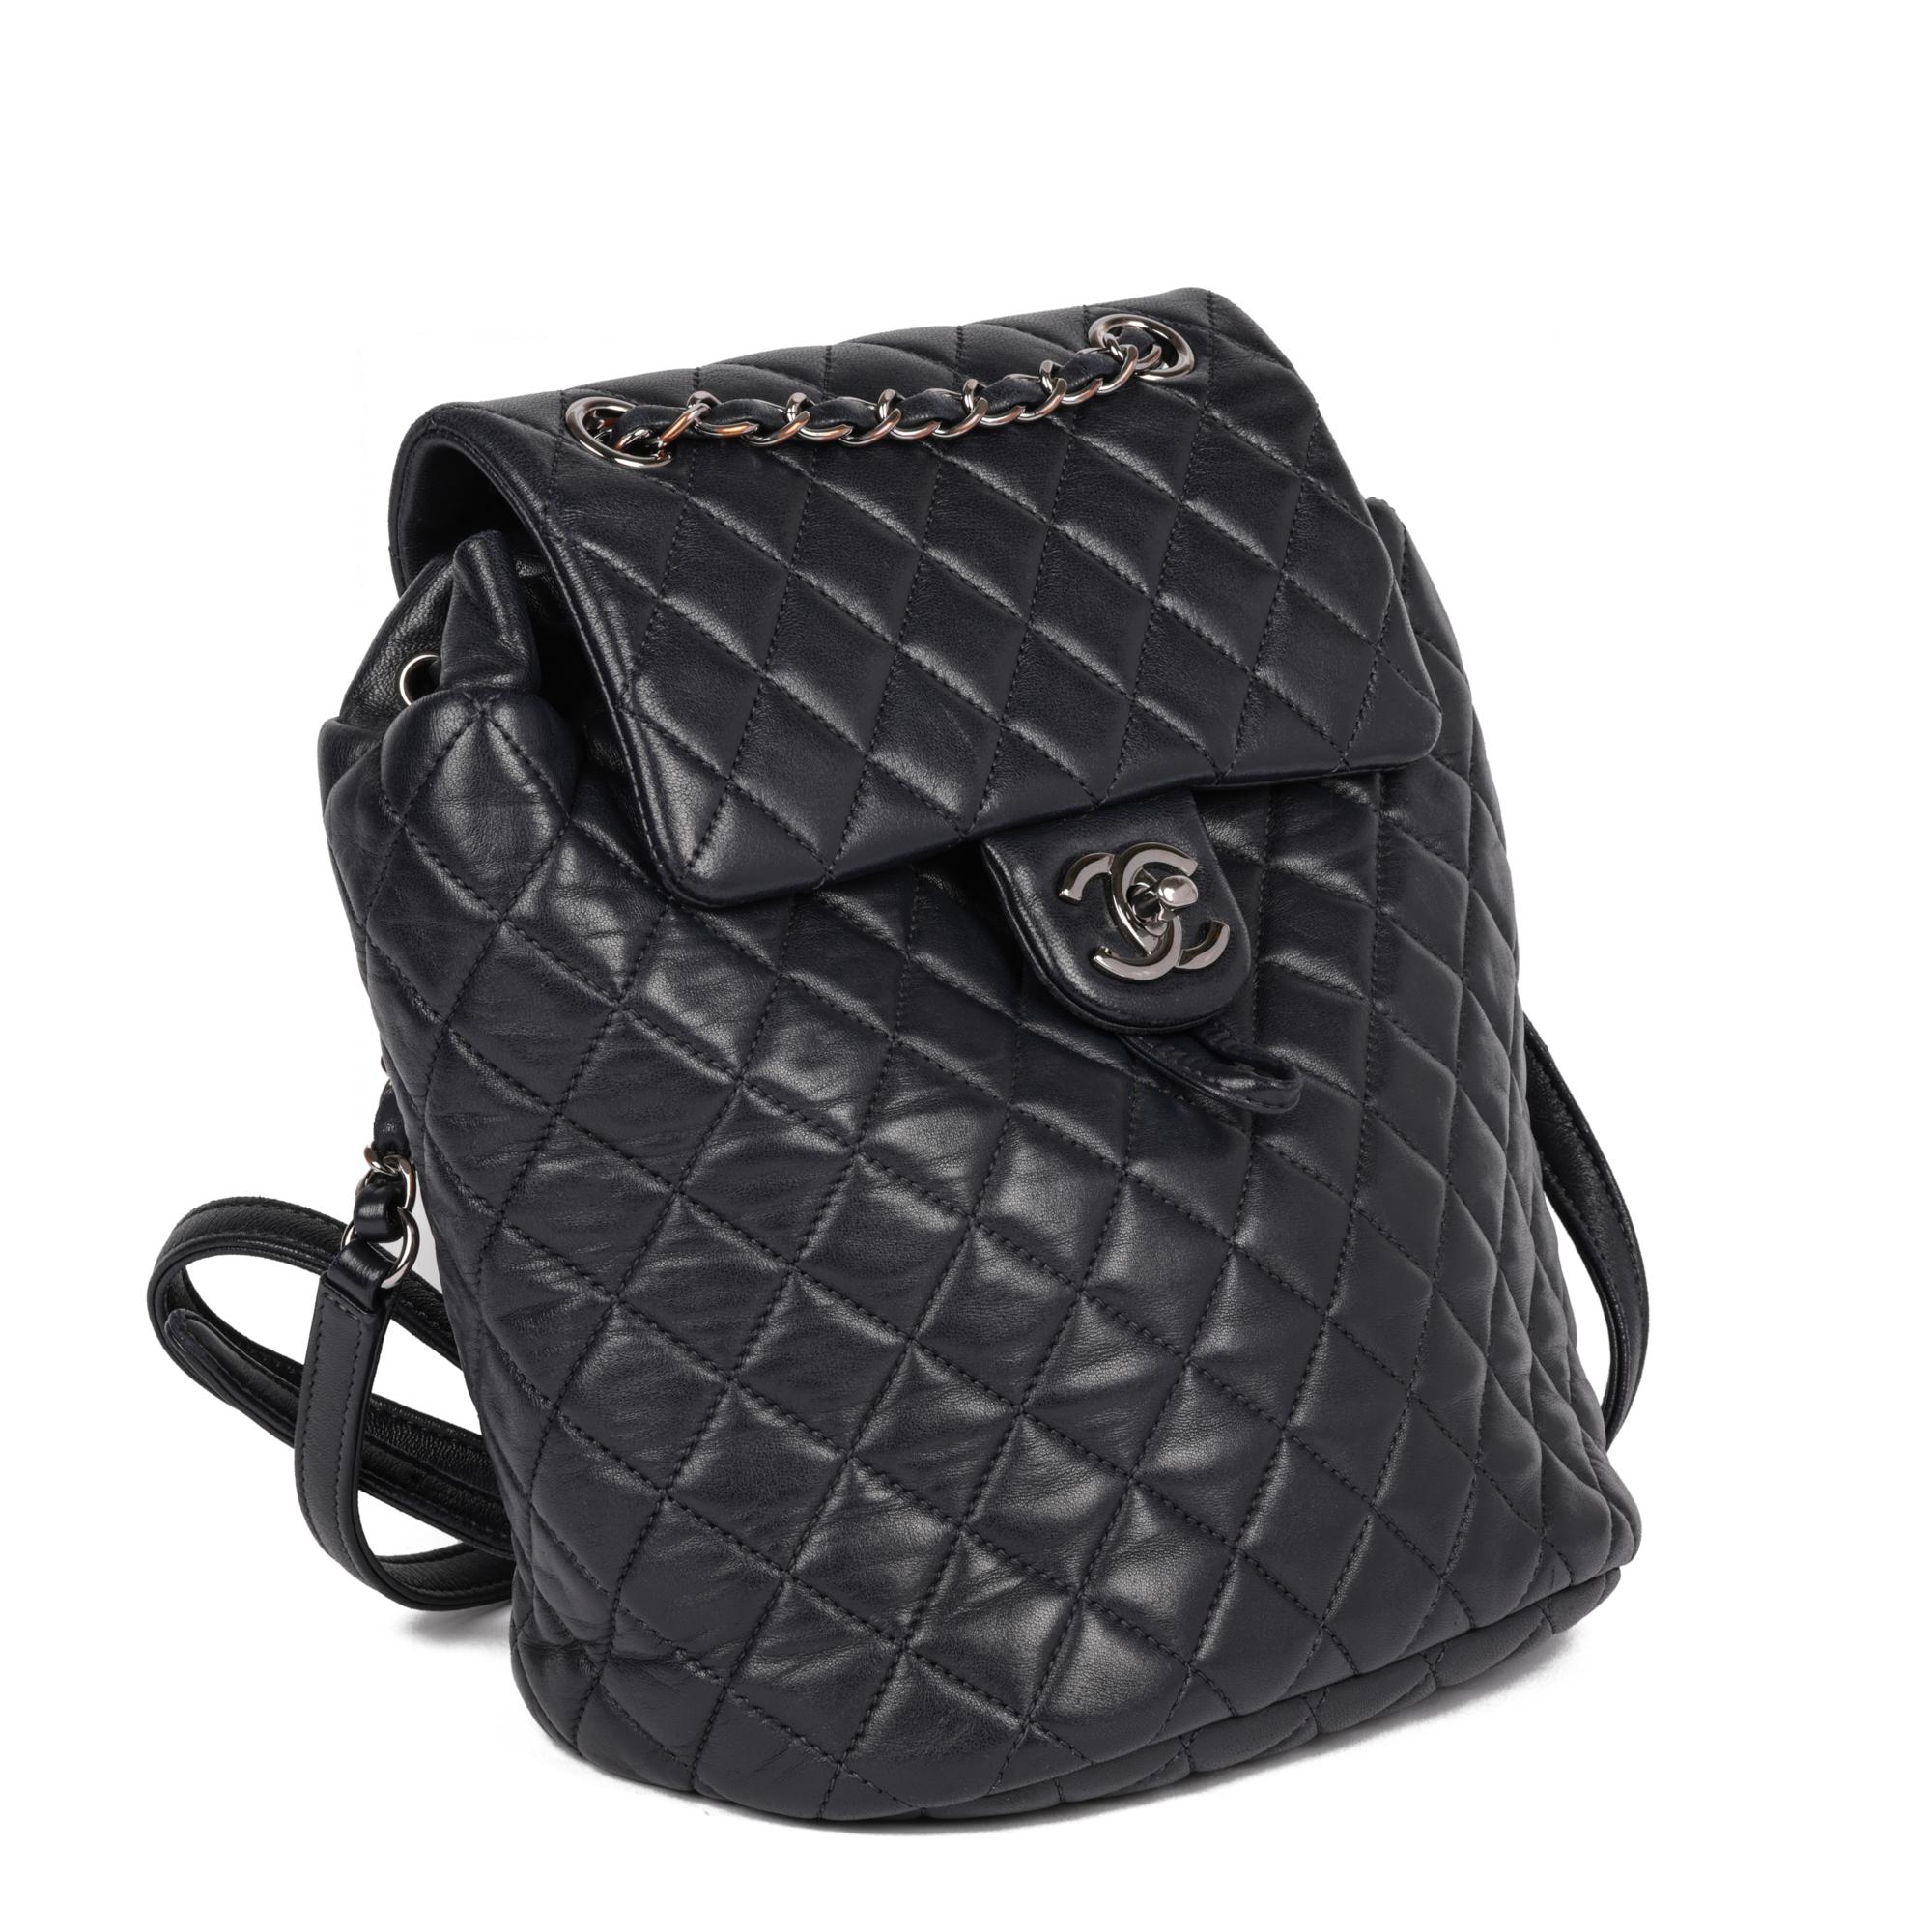 CHANEL
Indigo Quilted Lambskin Small Urban Spirit Backpack

Xupes Reference: HB5175
Serial Number: 23298554
Age (Circa): 2016
Accompanied By: Chanel Dust Bag, Authenticity Card
Authenticity Details: Authenticity Card, Serial Sticker (Made in